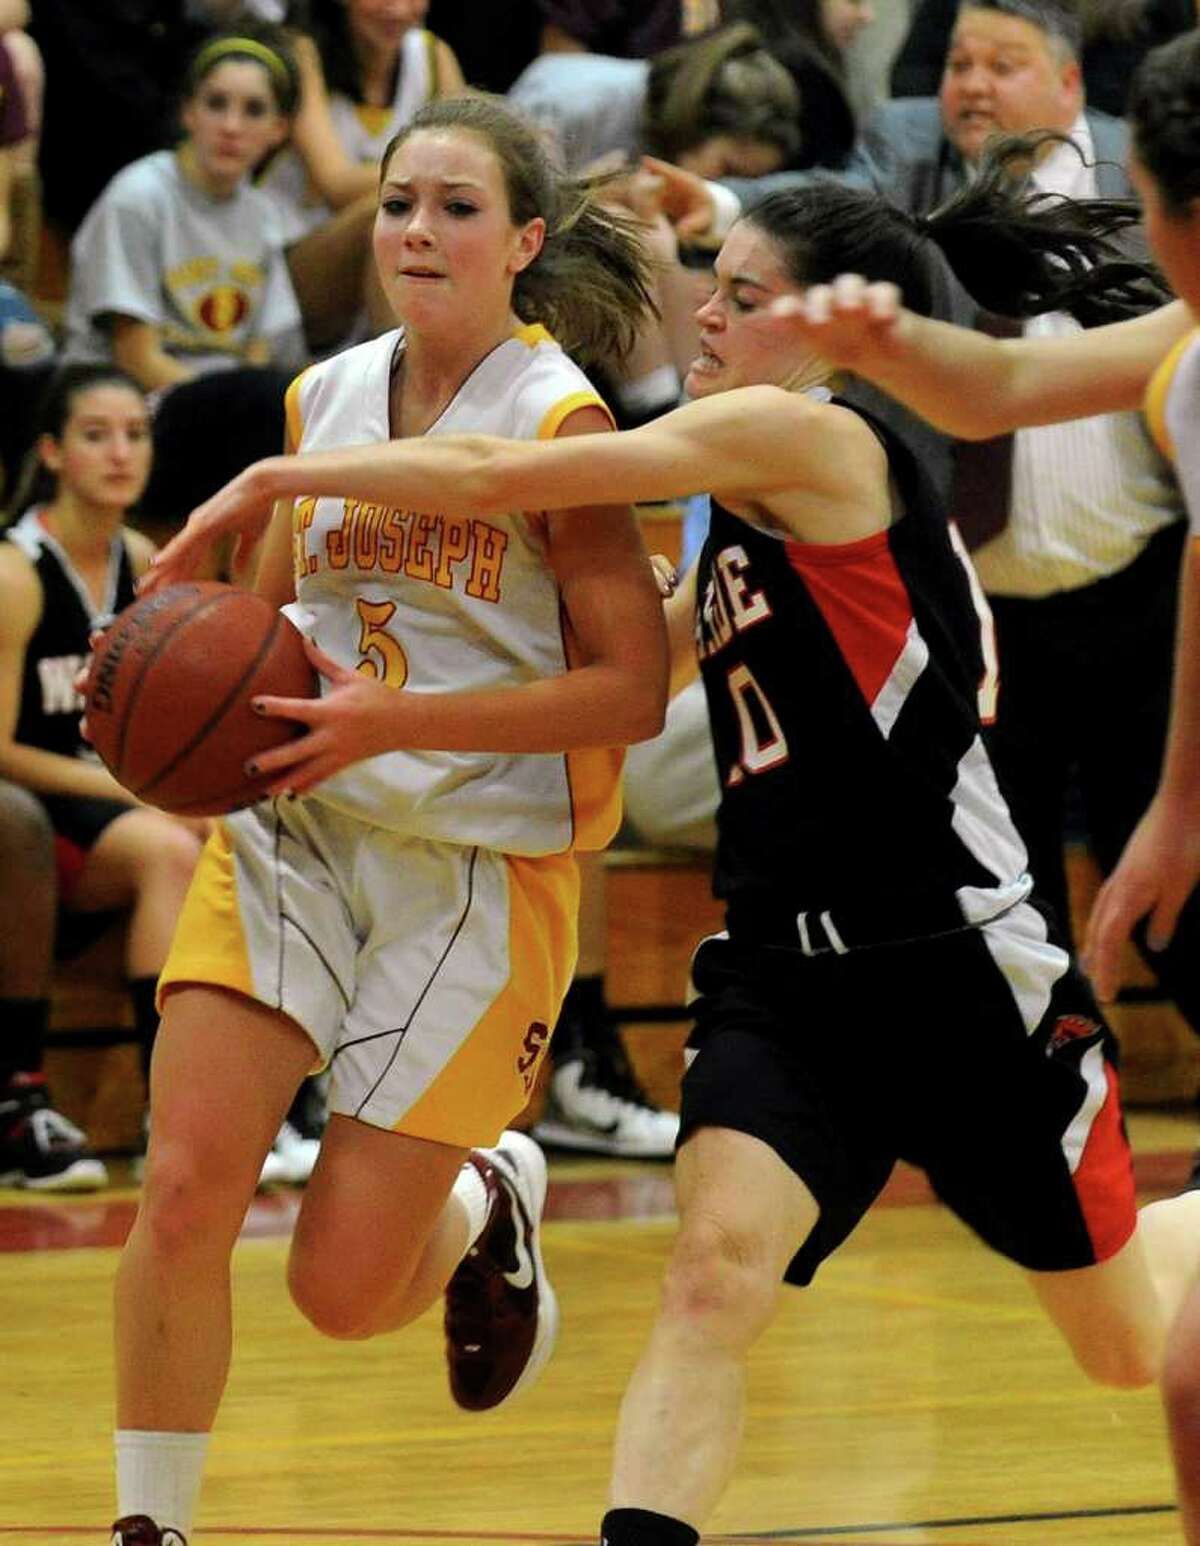 Fairfield Warde's #10 Kate Kerrigan, right, looks to steal away the ball from St. Joseph's #5 Lauren DellaVecchia, during girls basketball action in Trumbull, Conn. on Friday Dec. 9, 2011.